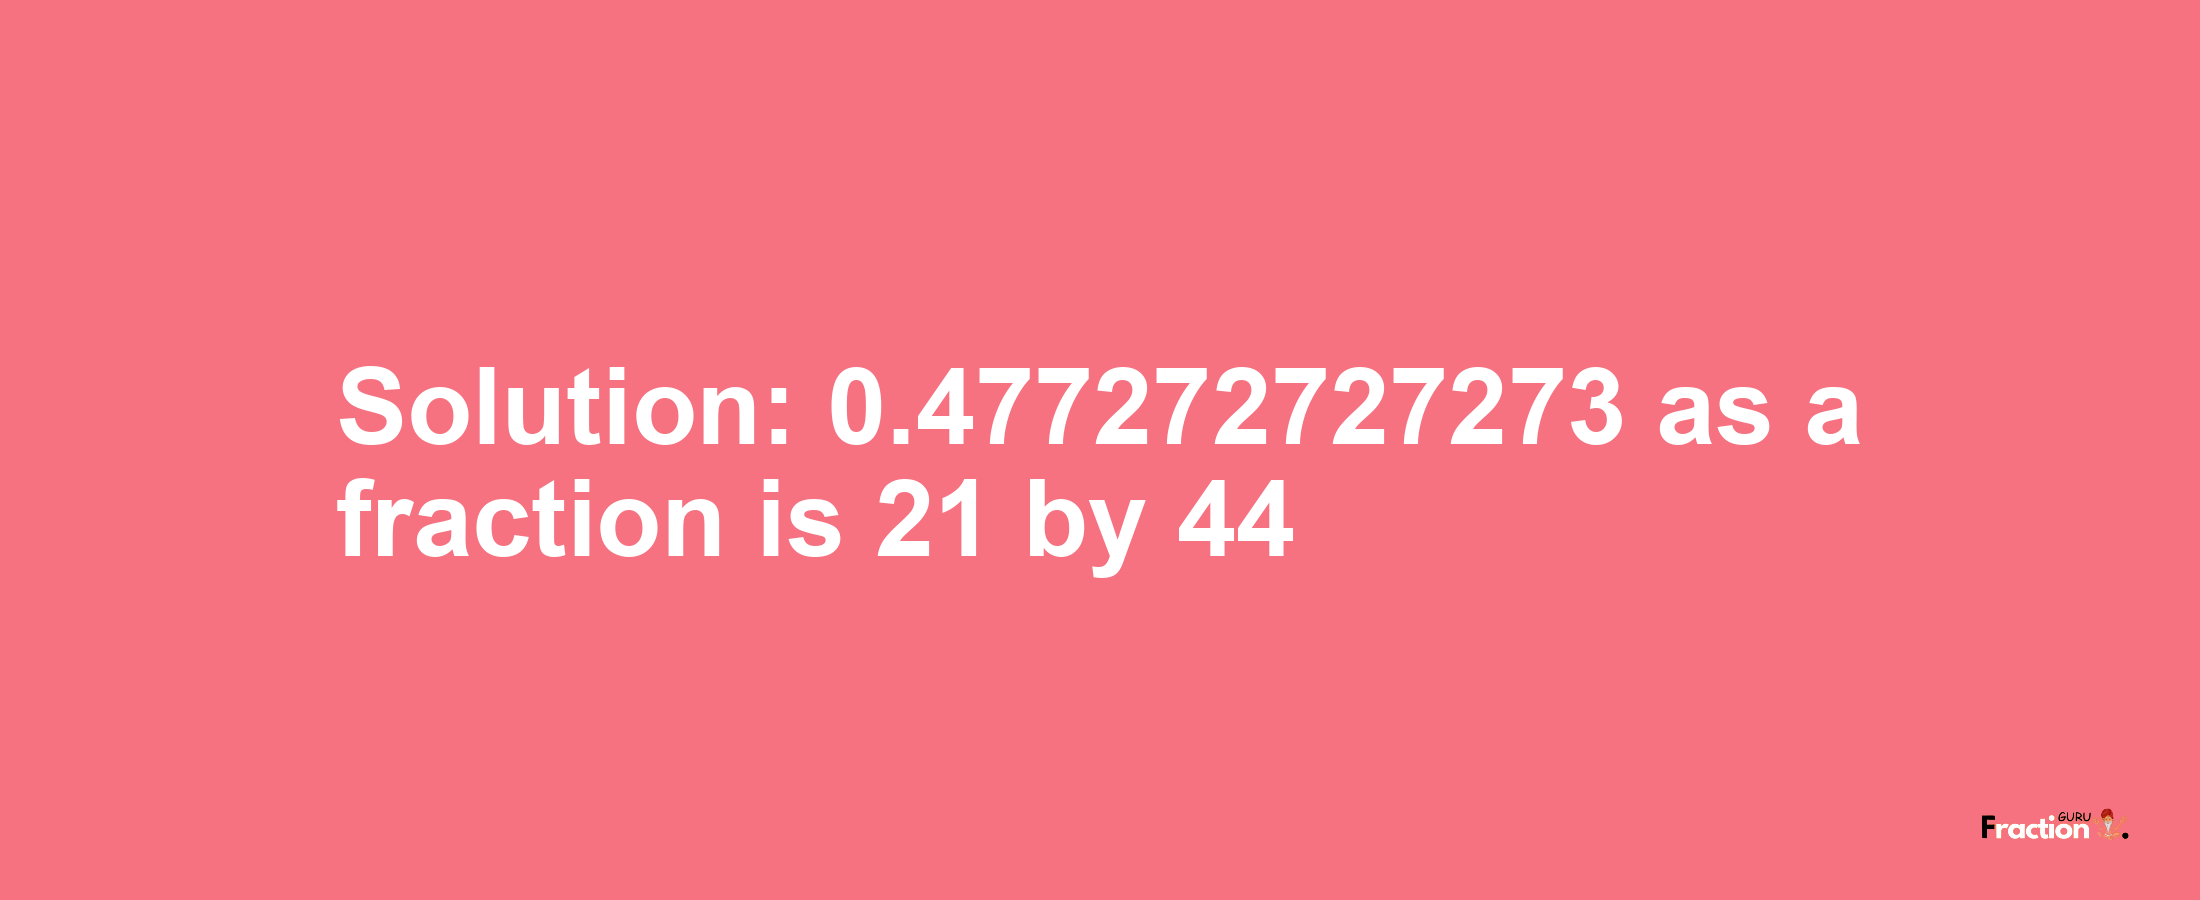 Solution:0.477272727273 as a fraction is 21/44